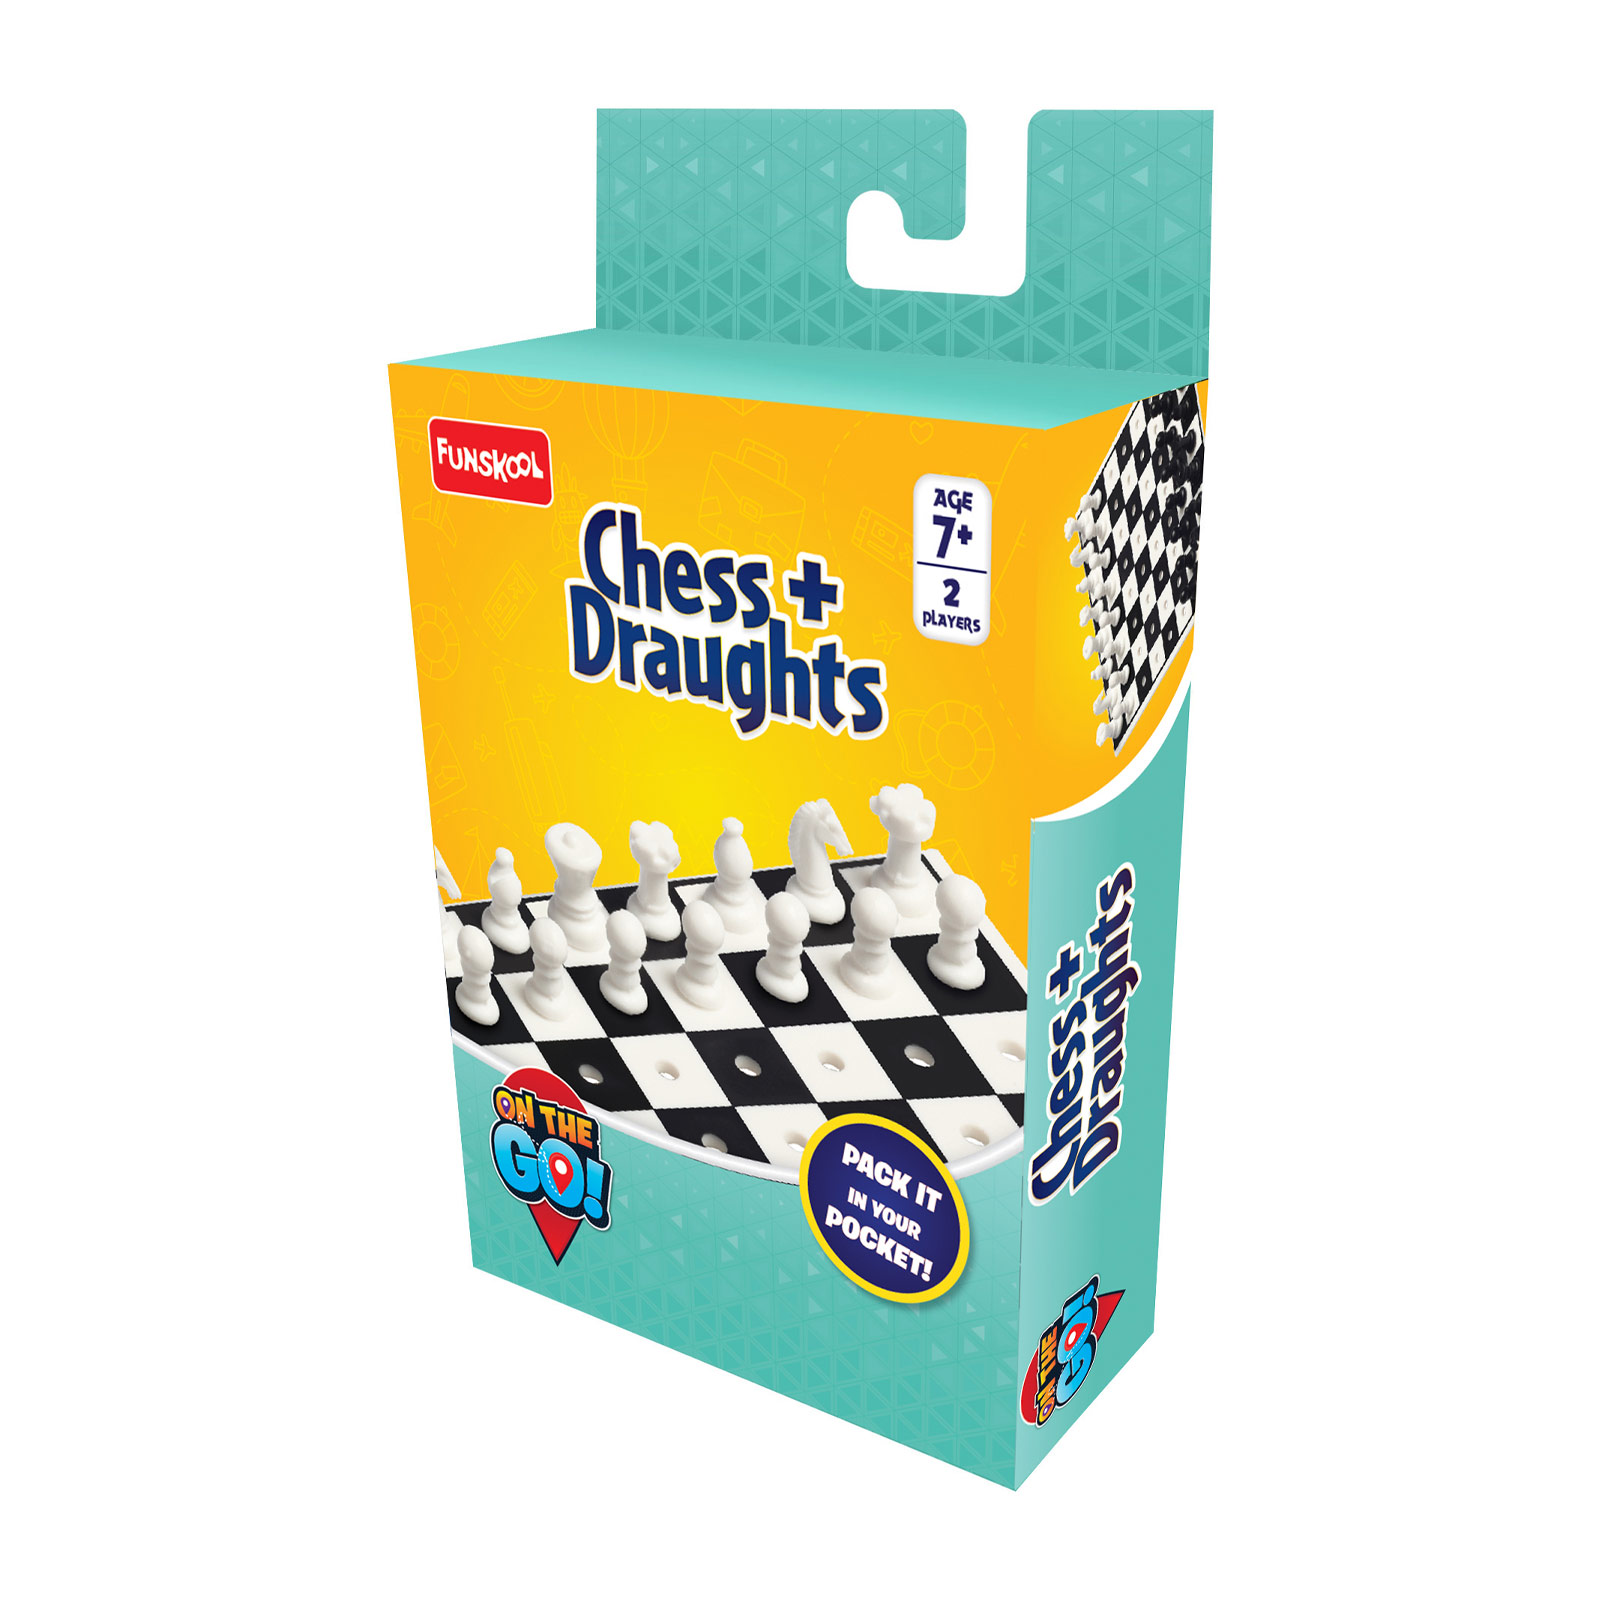 Travel Chess & Draughts